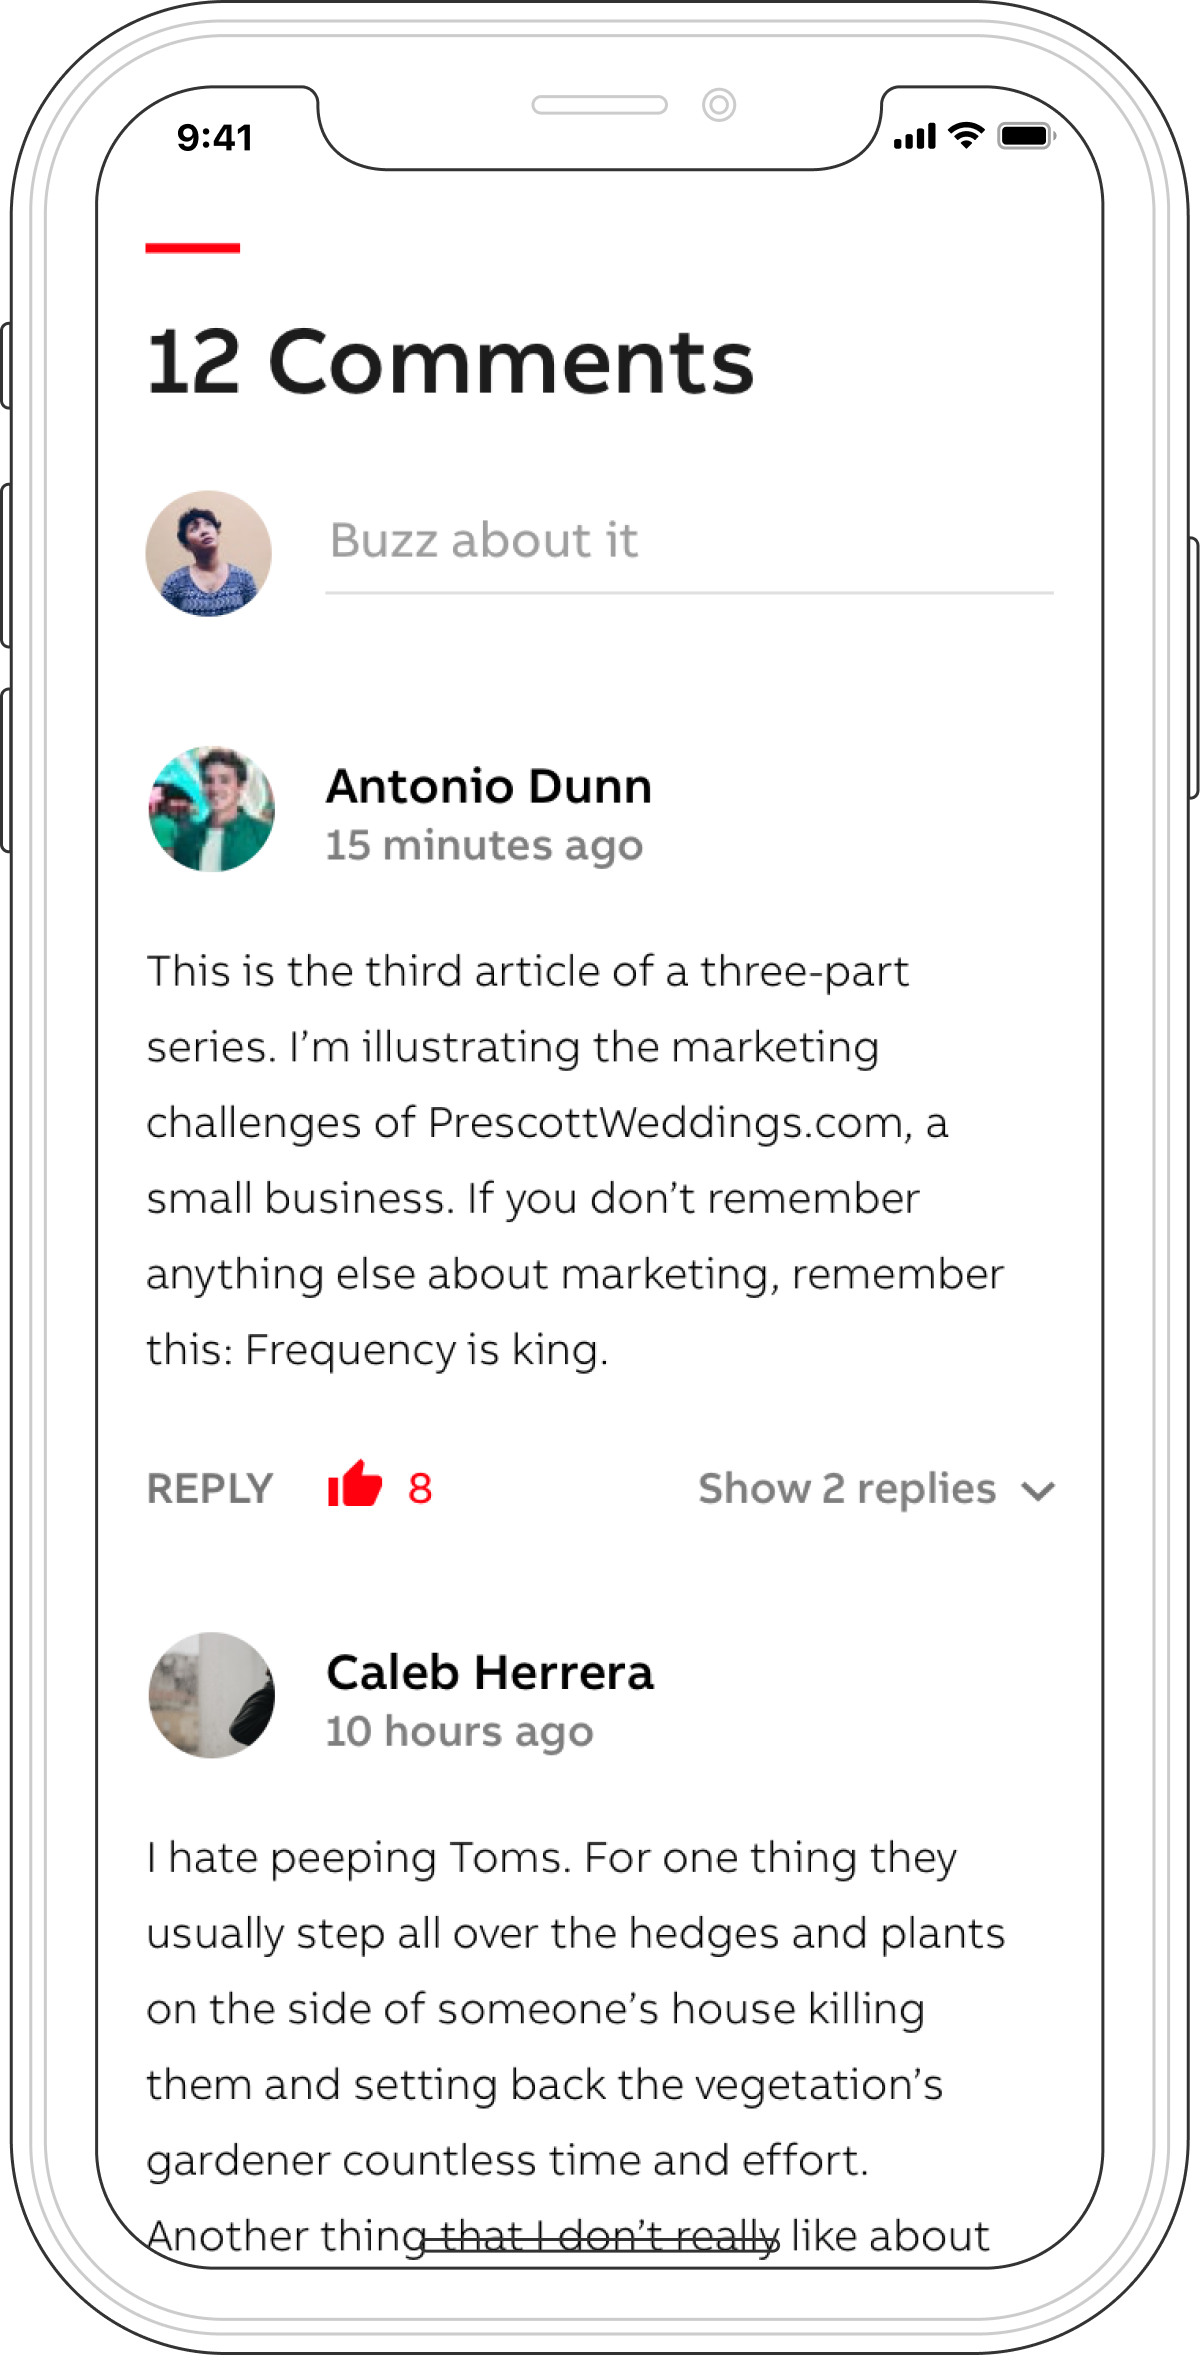 Project the commenting app cover